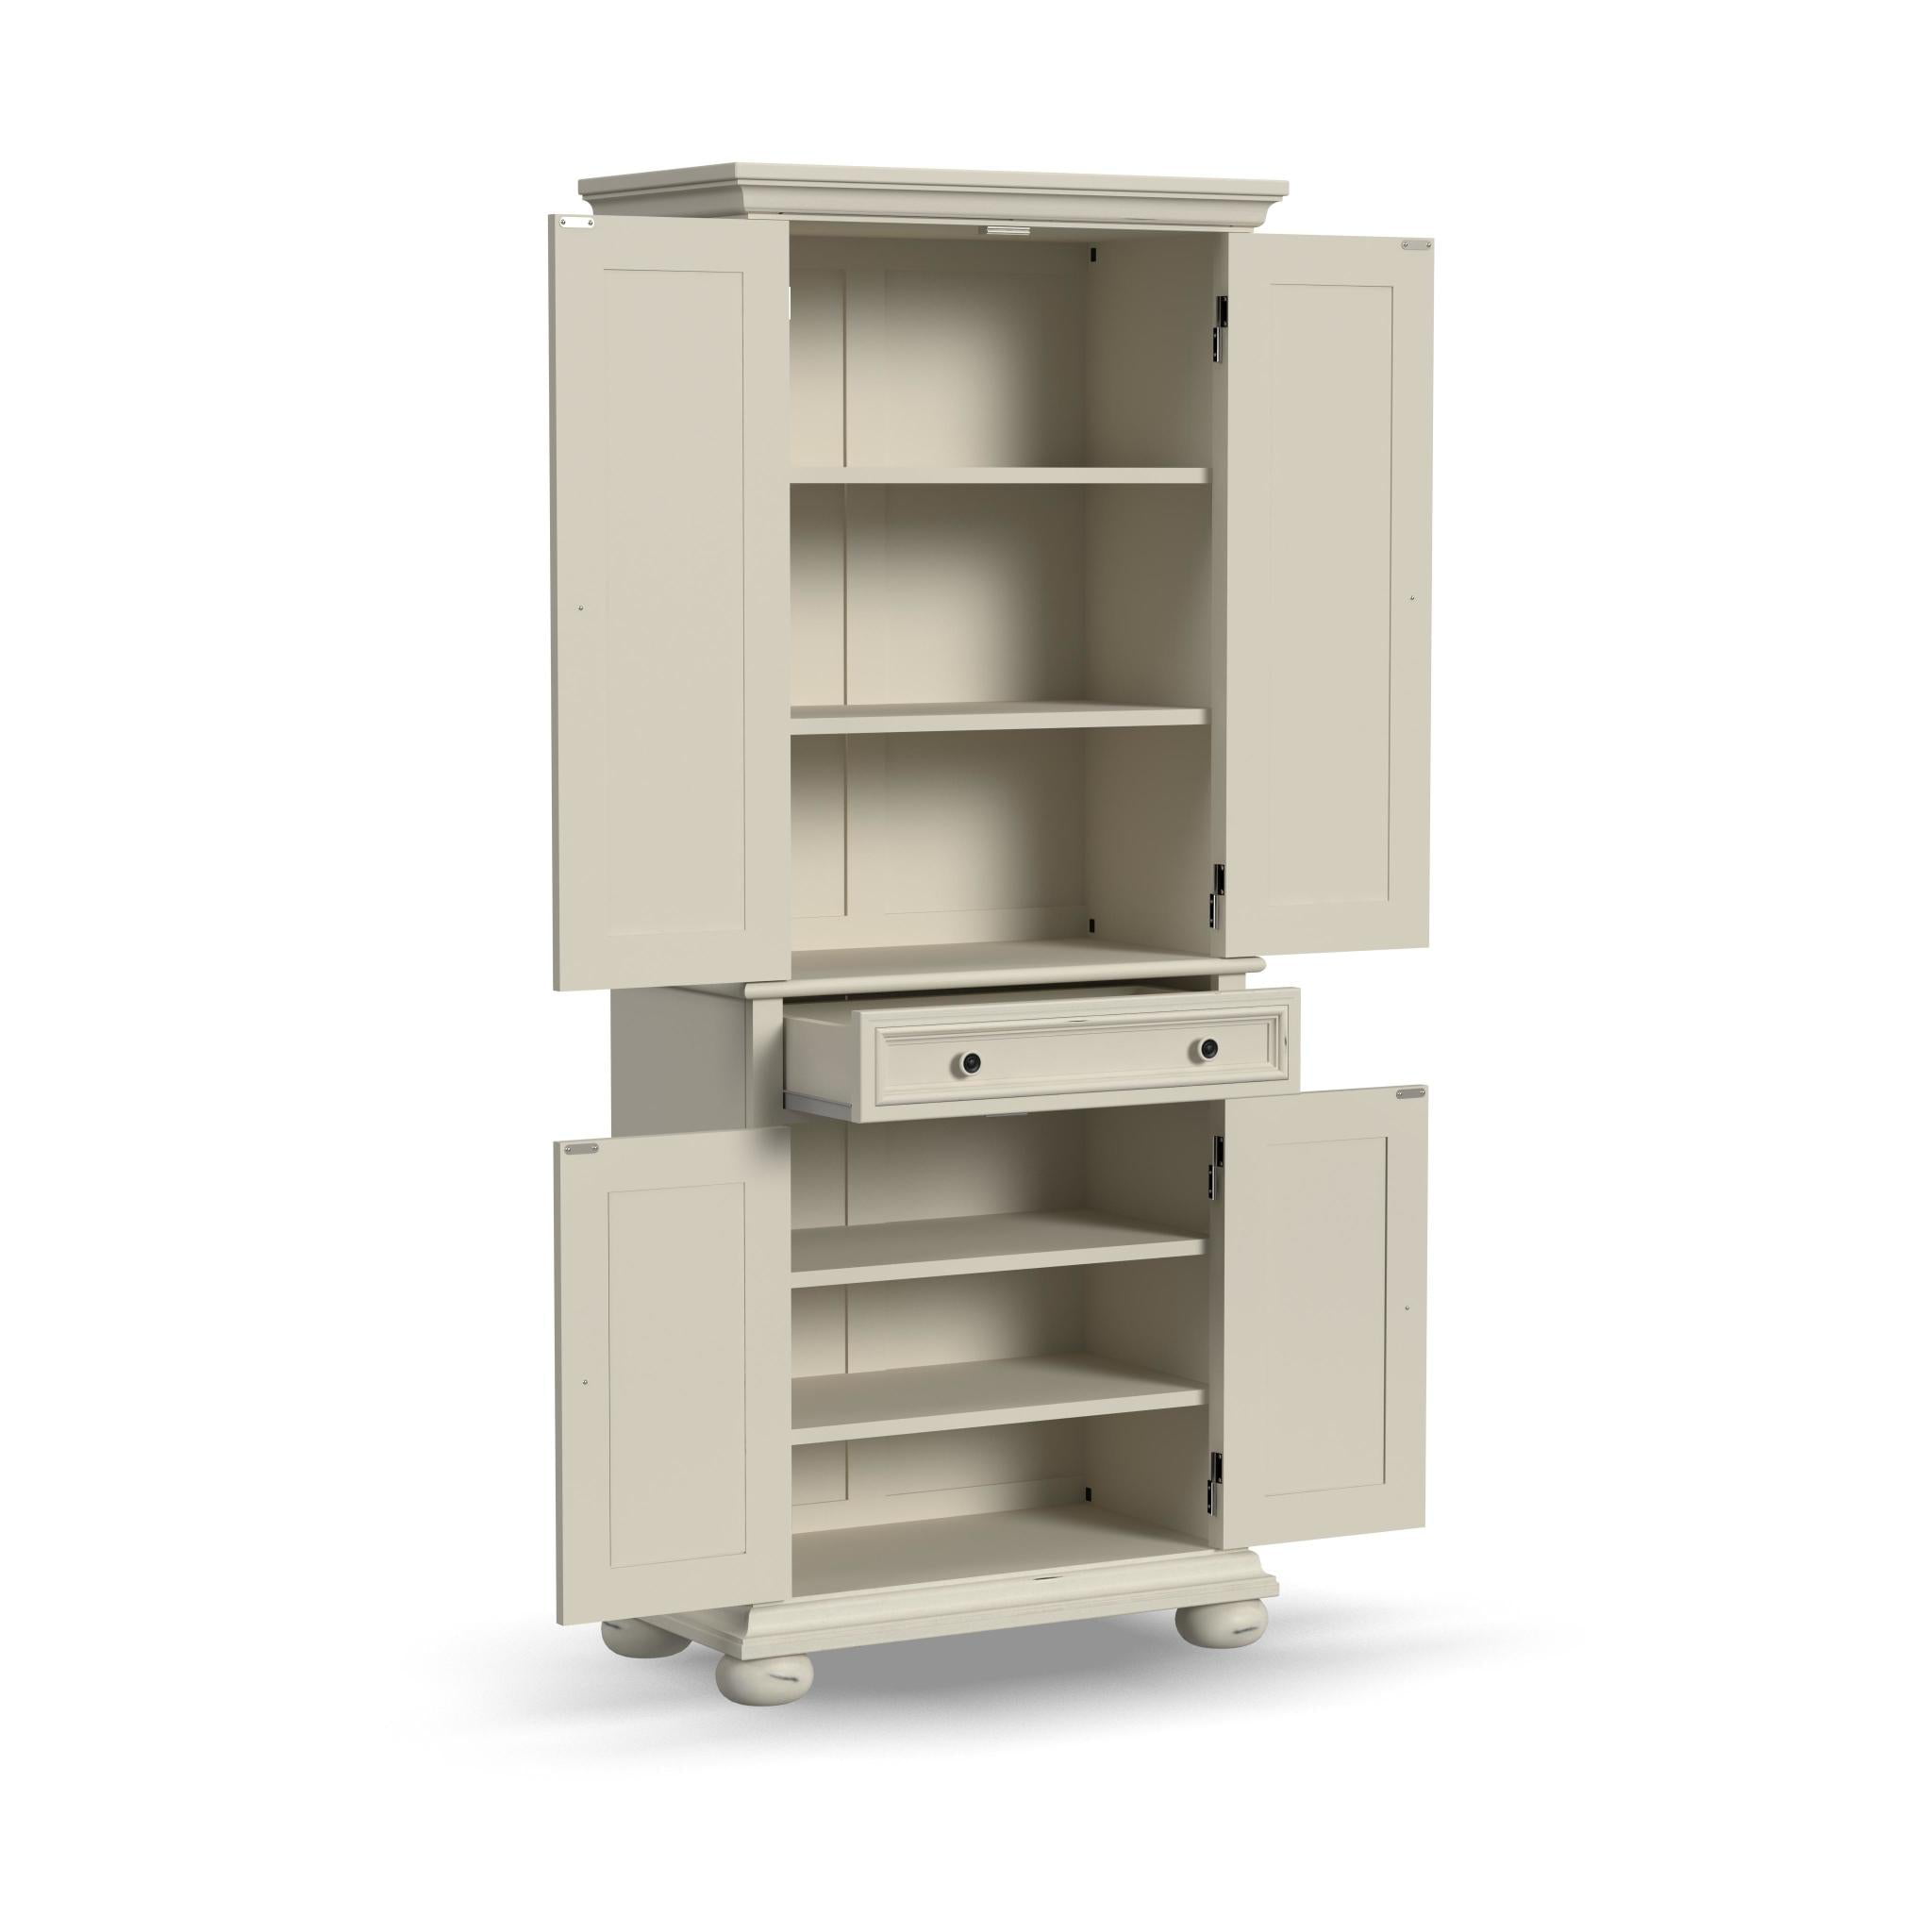 Dover Kitchen Pantry White - Home Styles : Target